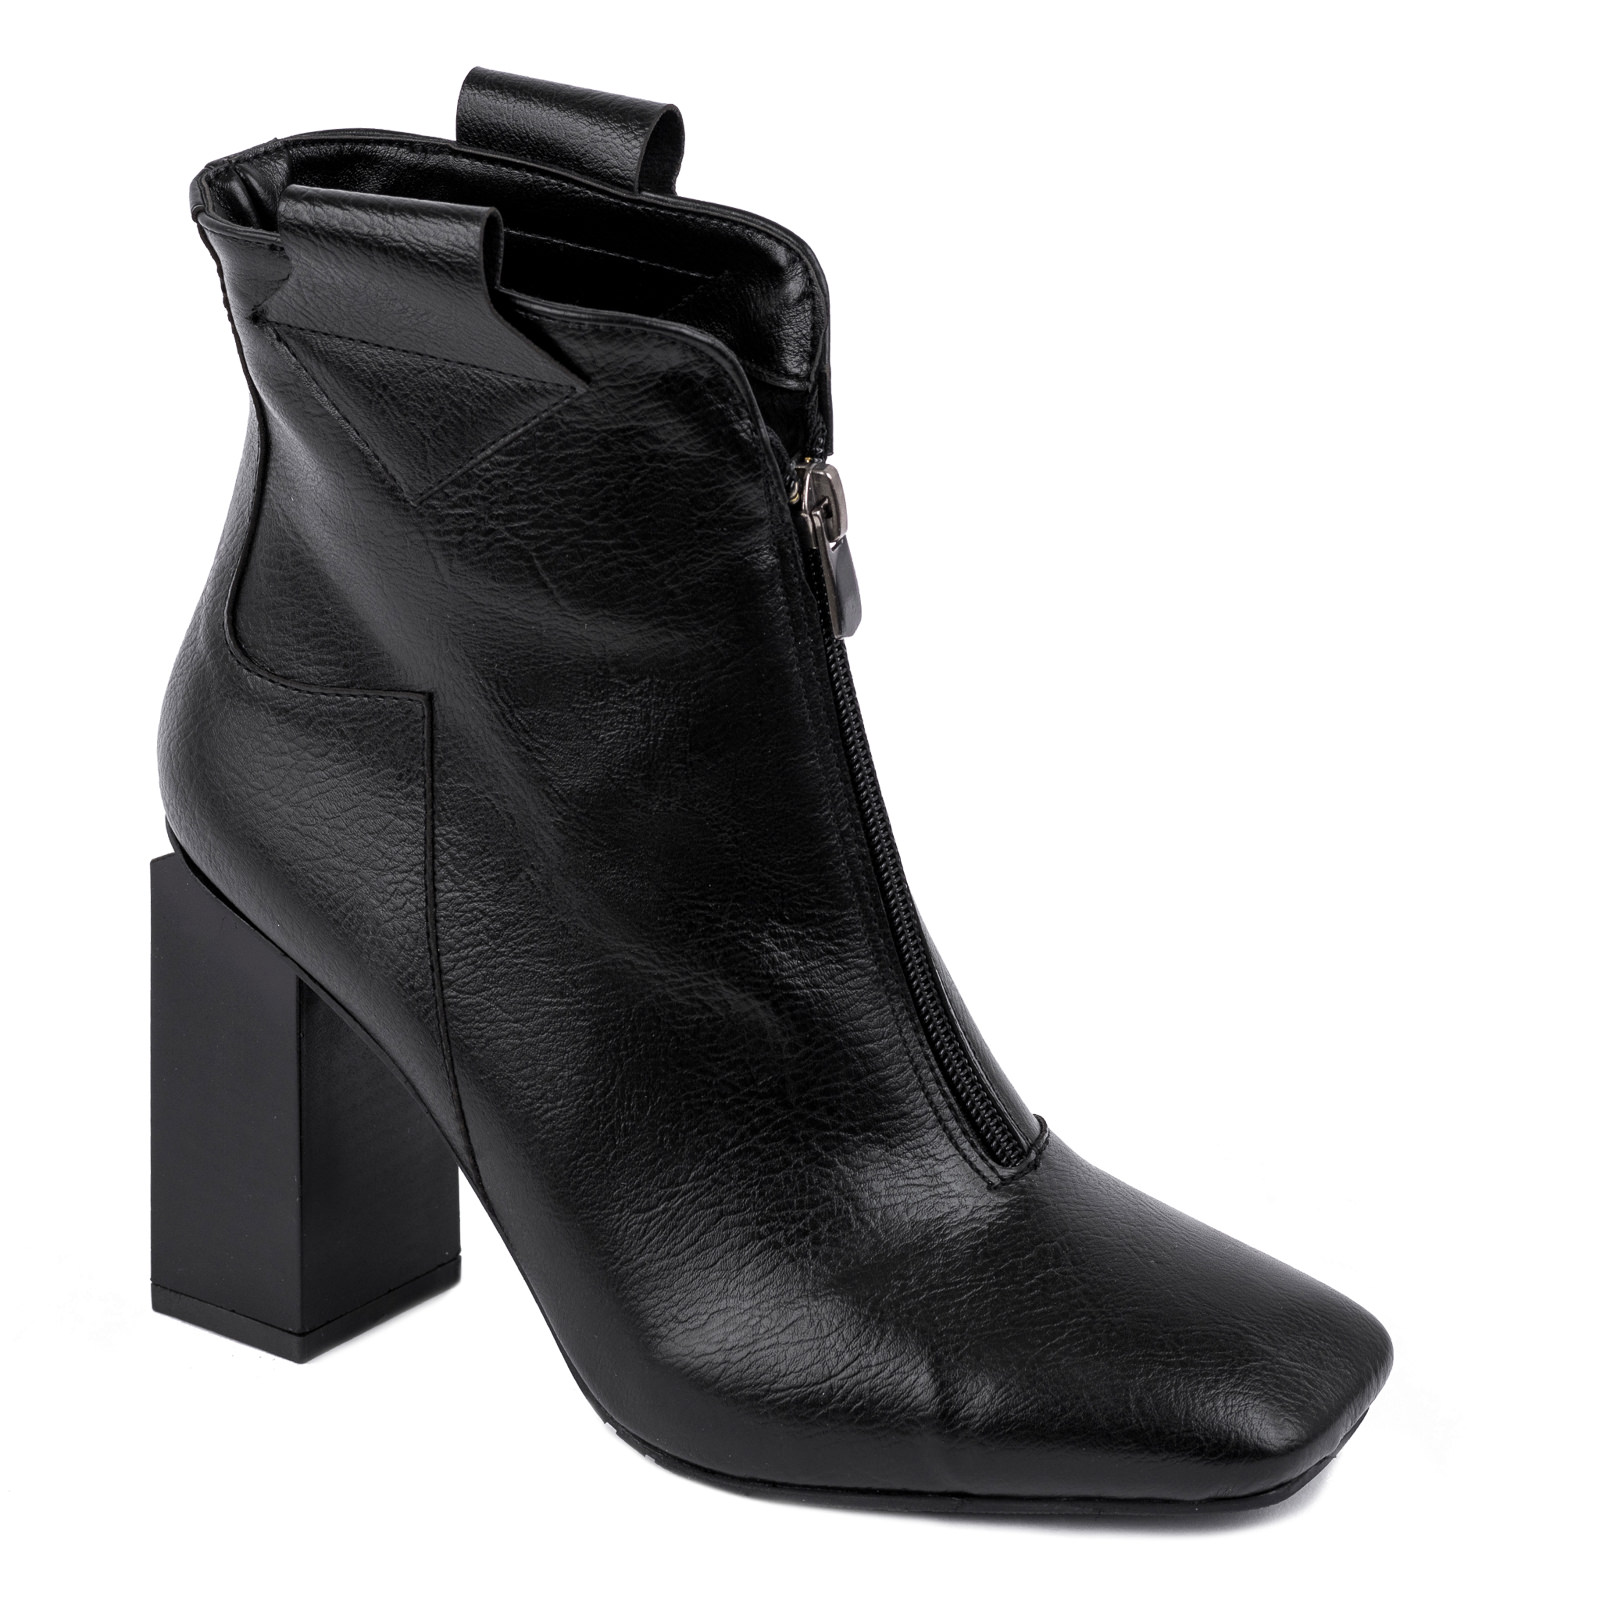 ANKLE BOOTS WITH ZIPPER AND BLOCK HEEL - BLACK